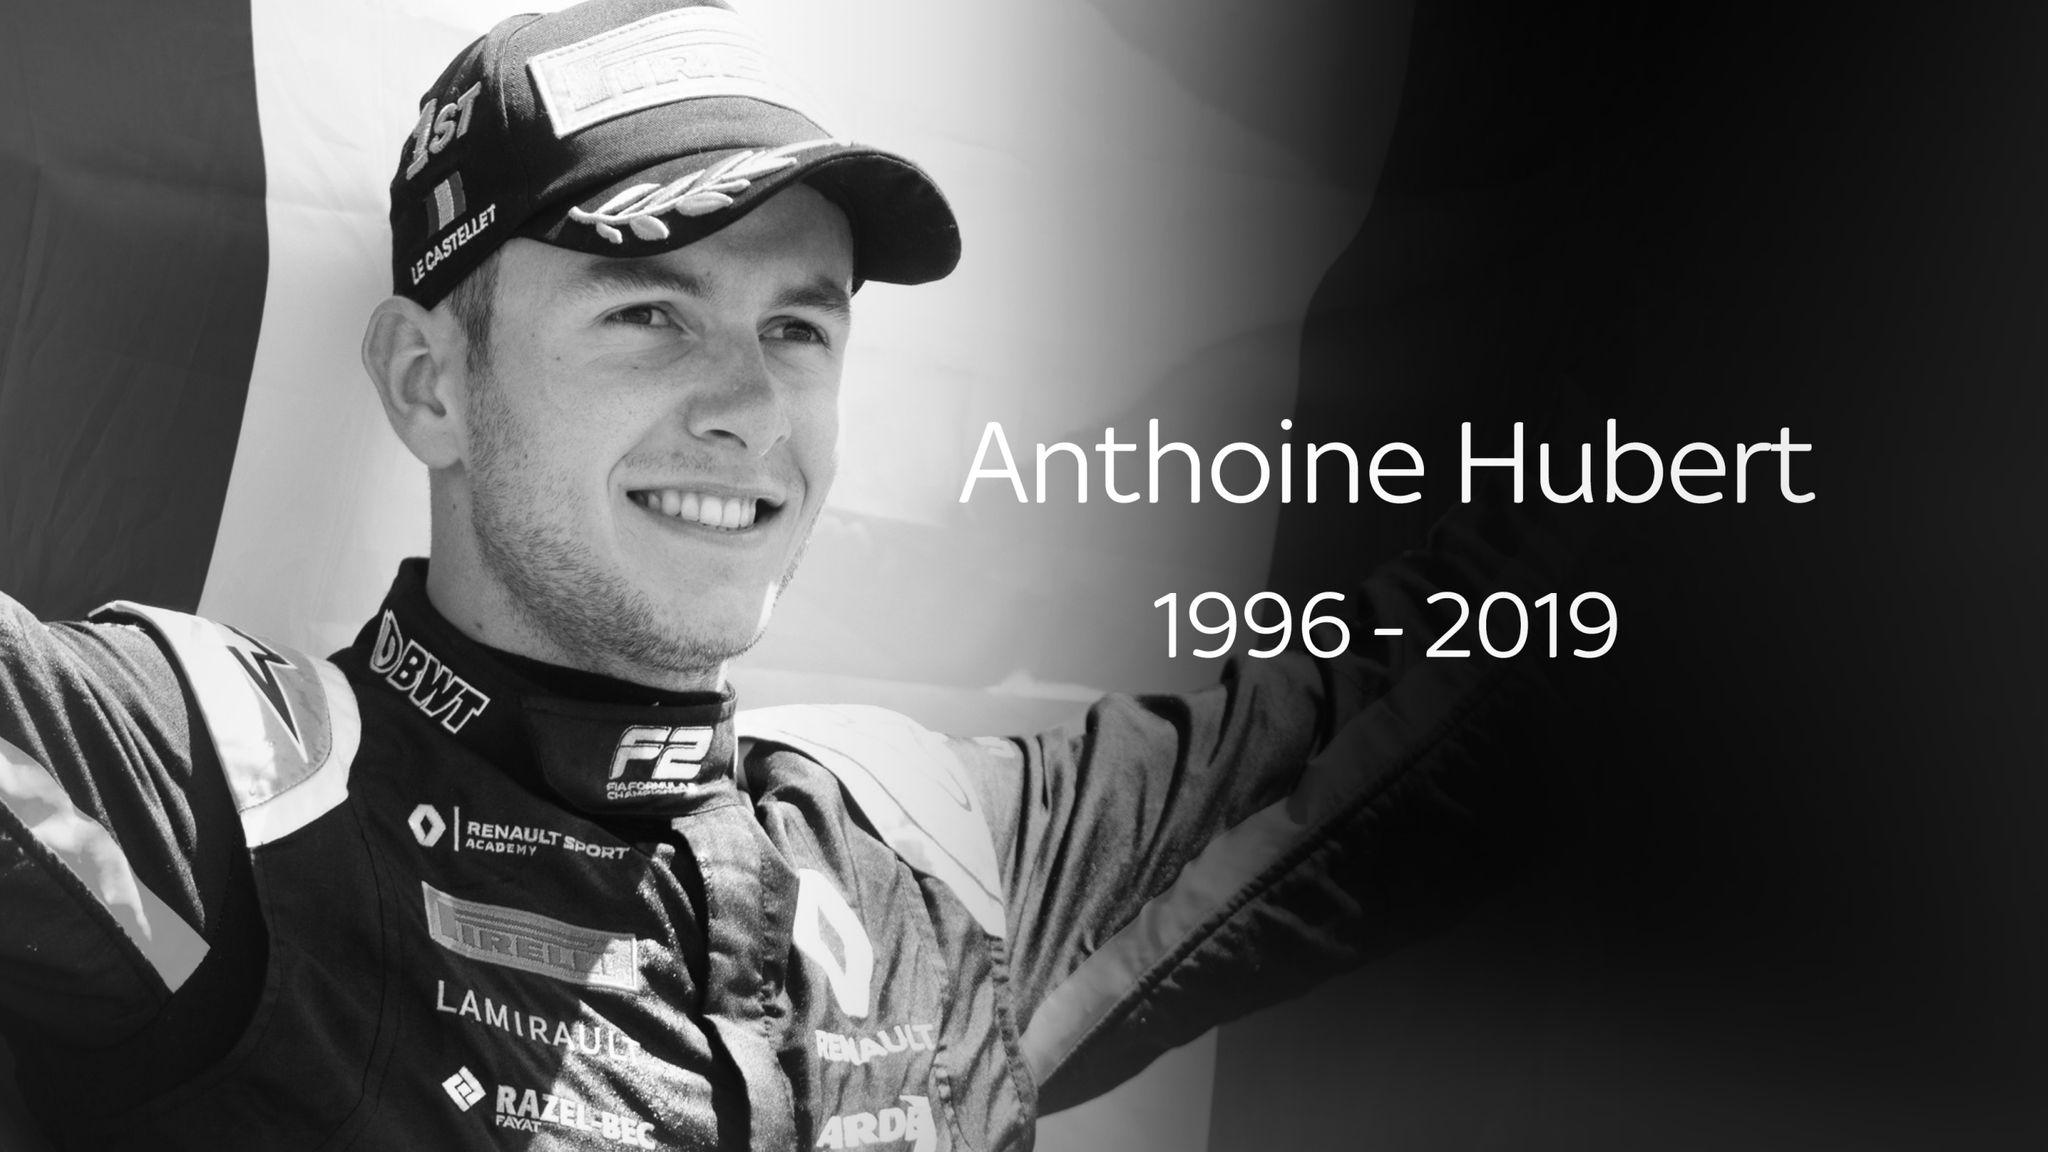 Anthoine Hubert killed in F2 accident at Spa